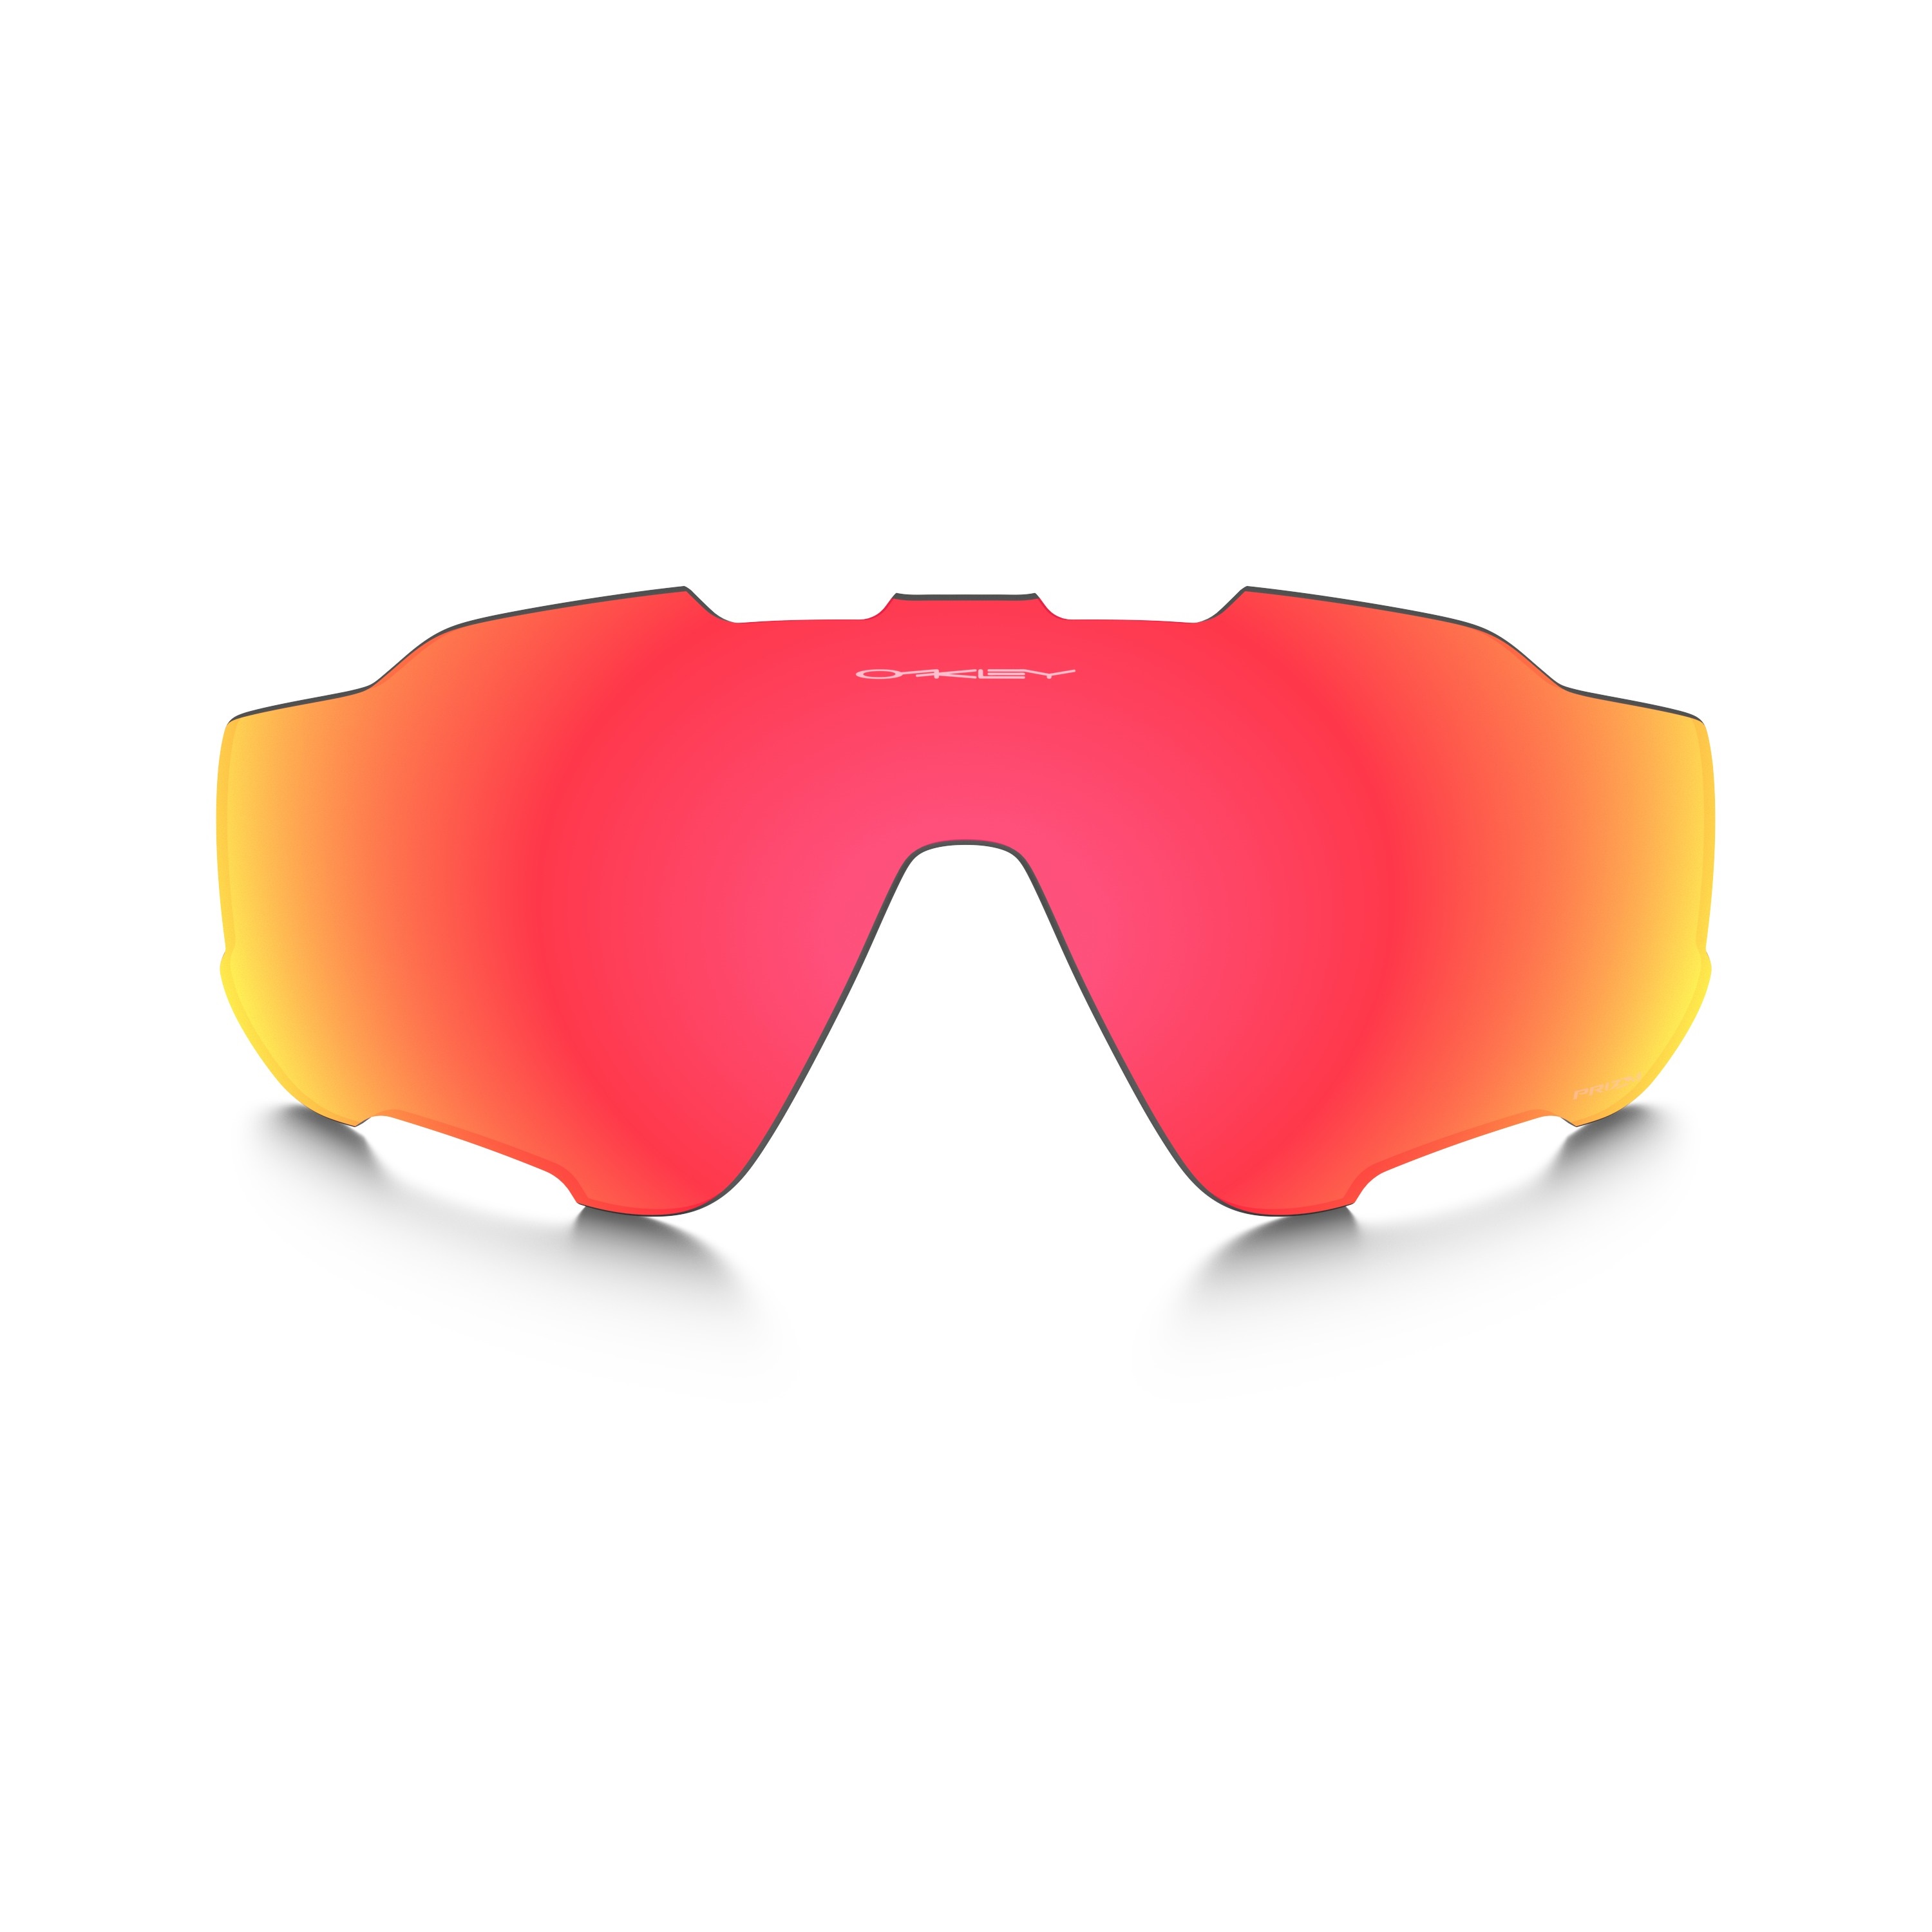 Buy Jawbreaker Replacement Lens Prizm Ruby here | Outnorth